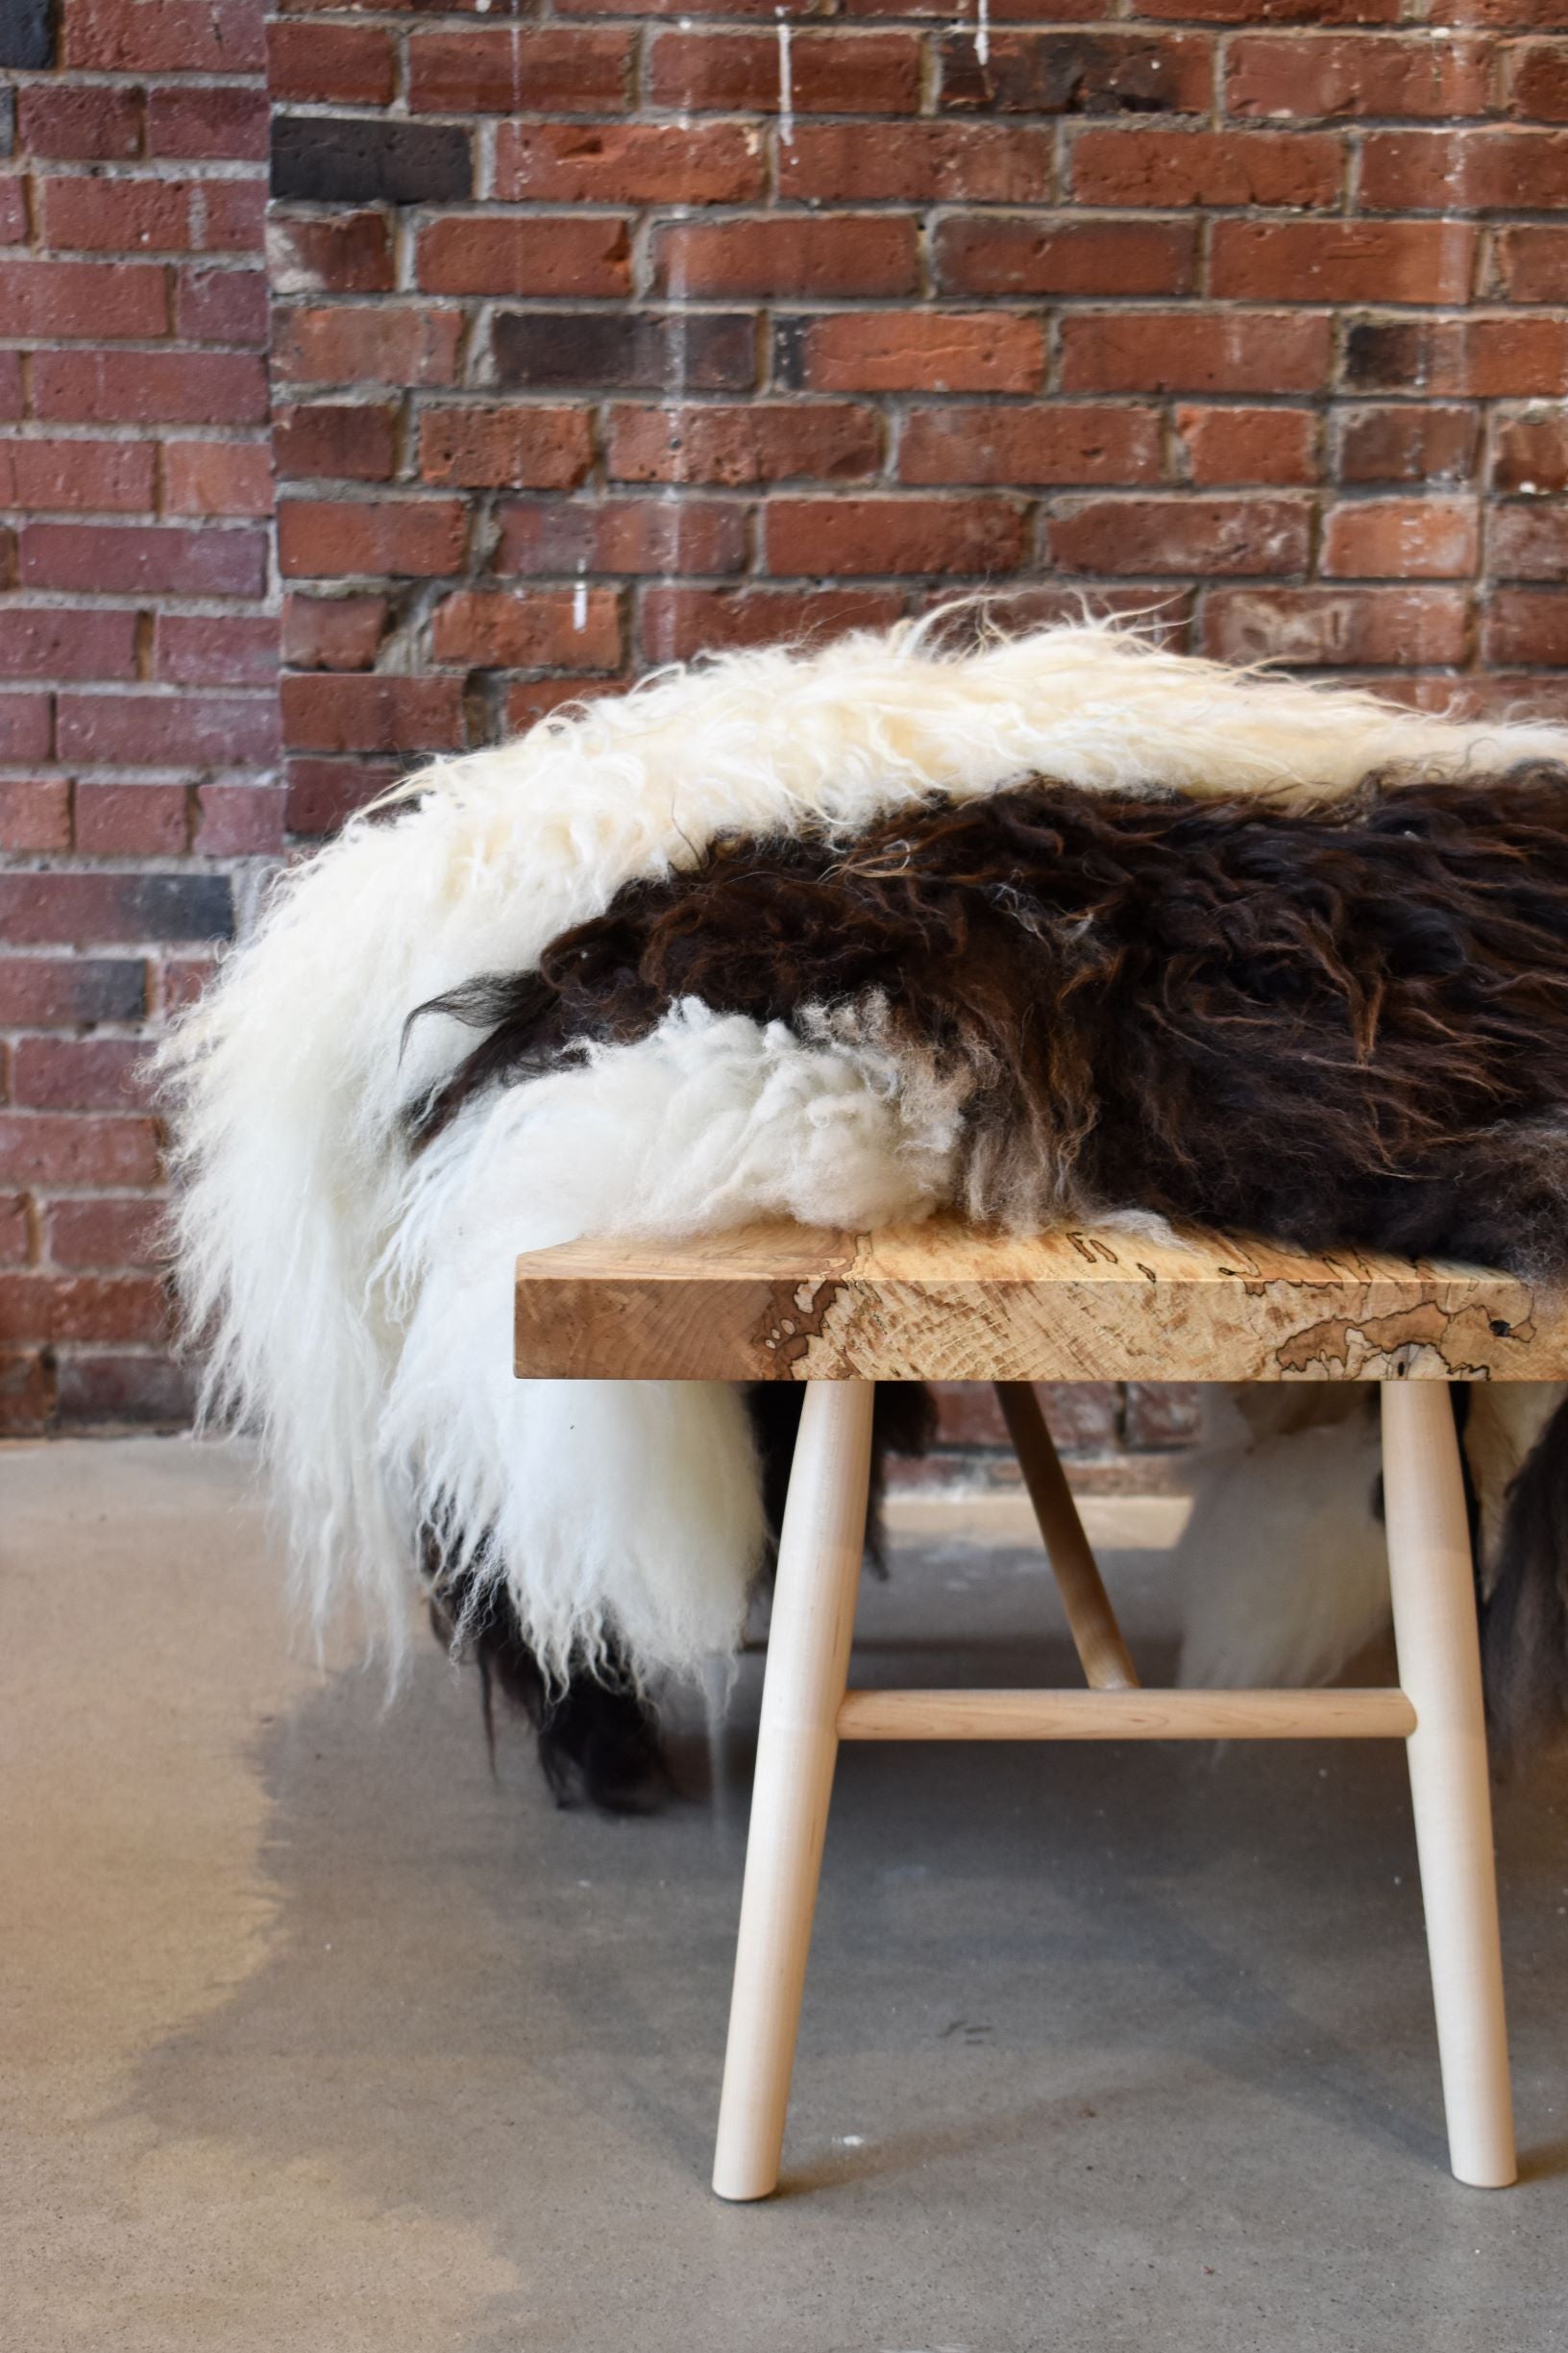 Solid wood bench with pile of white and brown sheepskin throws